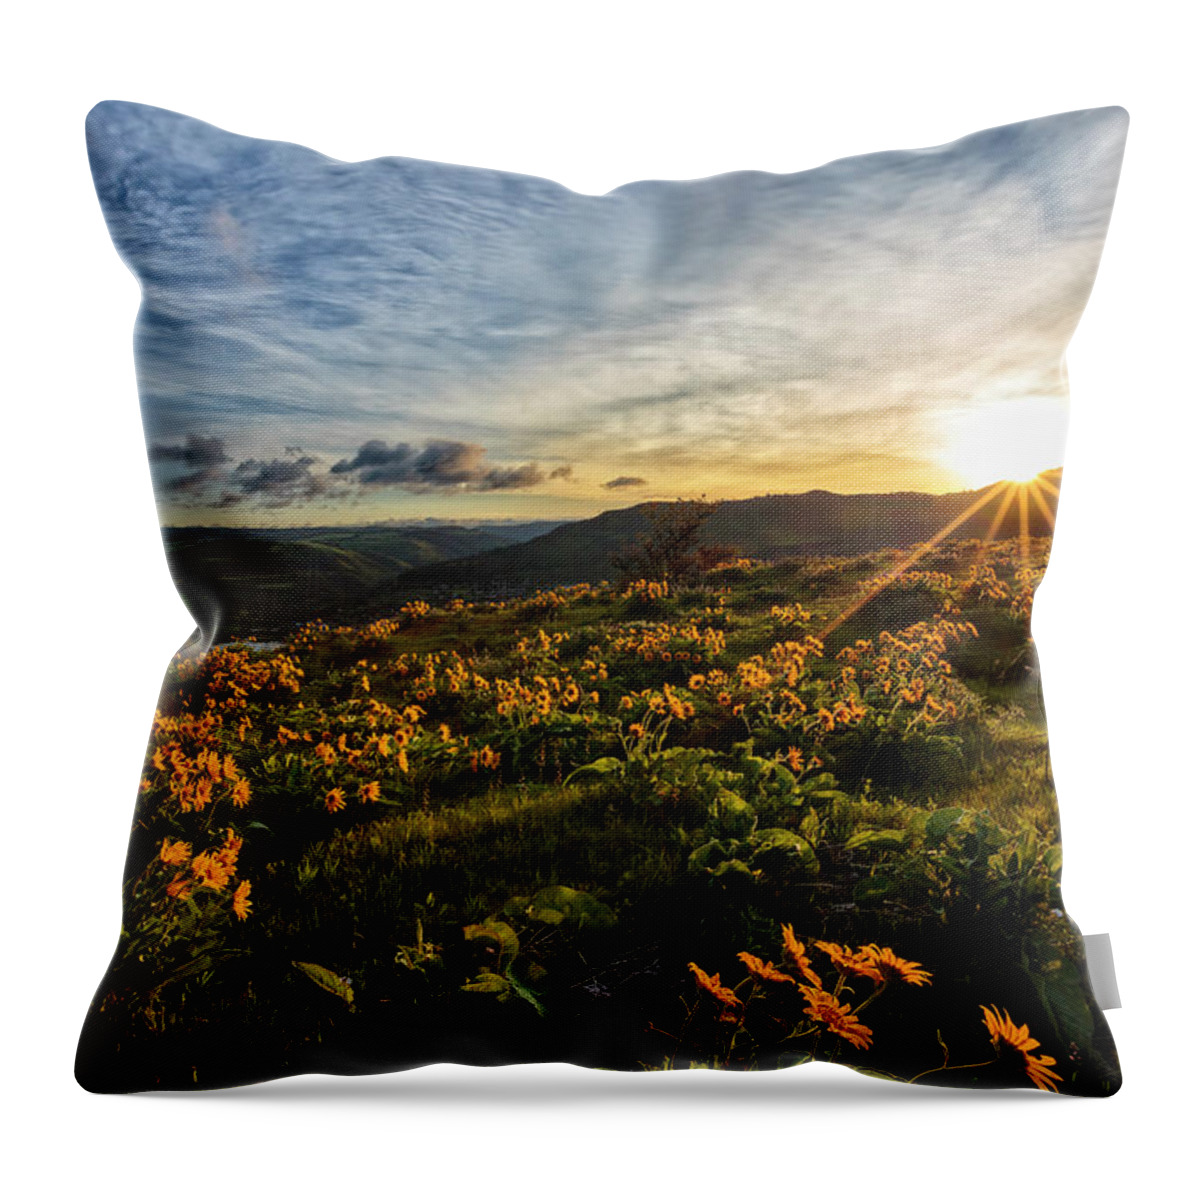 Sunrise In The Gorge Throw Pillow featuring the photograph Sunrise in the Gorge by Wes and Dotty Weber